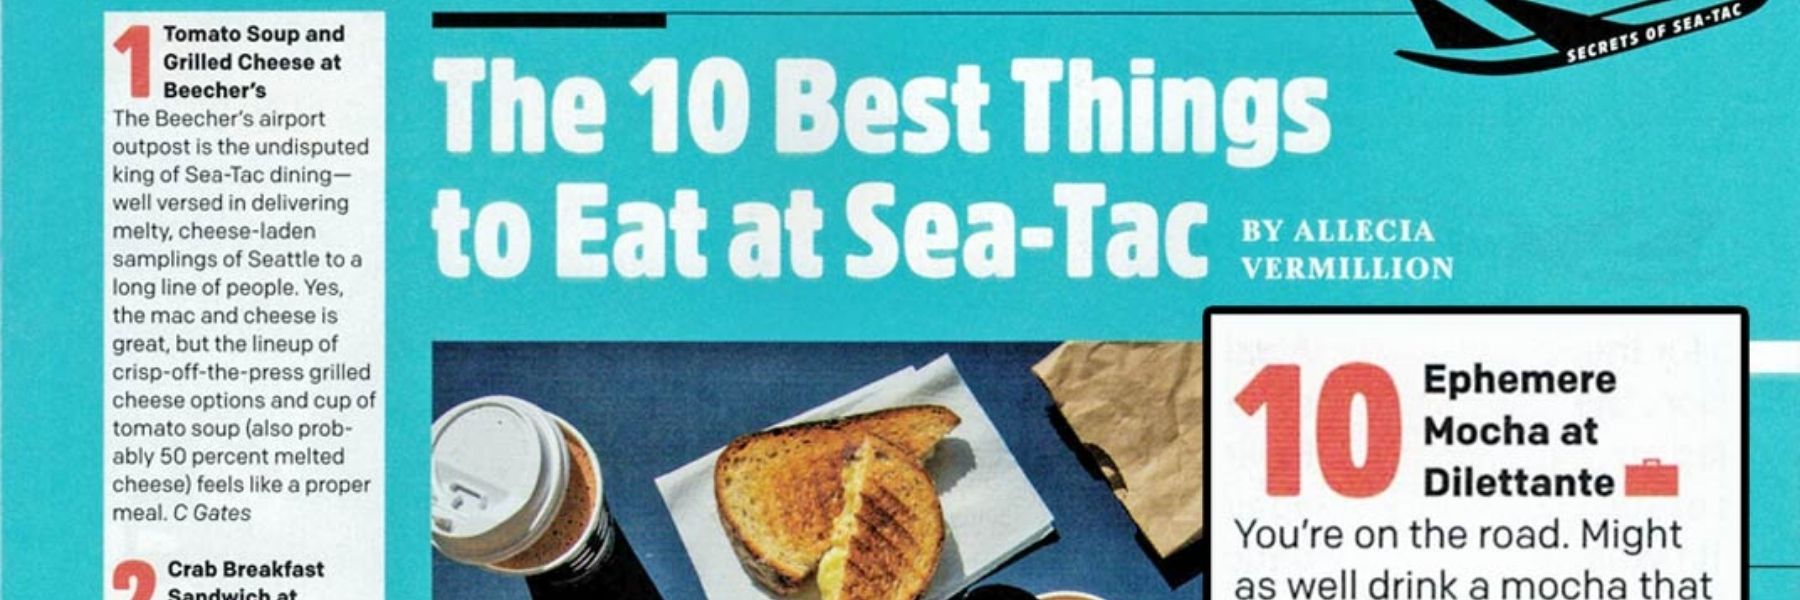 The 10 Best Things to Eat at Sea-Tac by Seattle Metropolitan Magazine